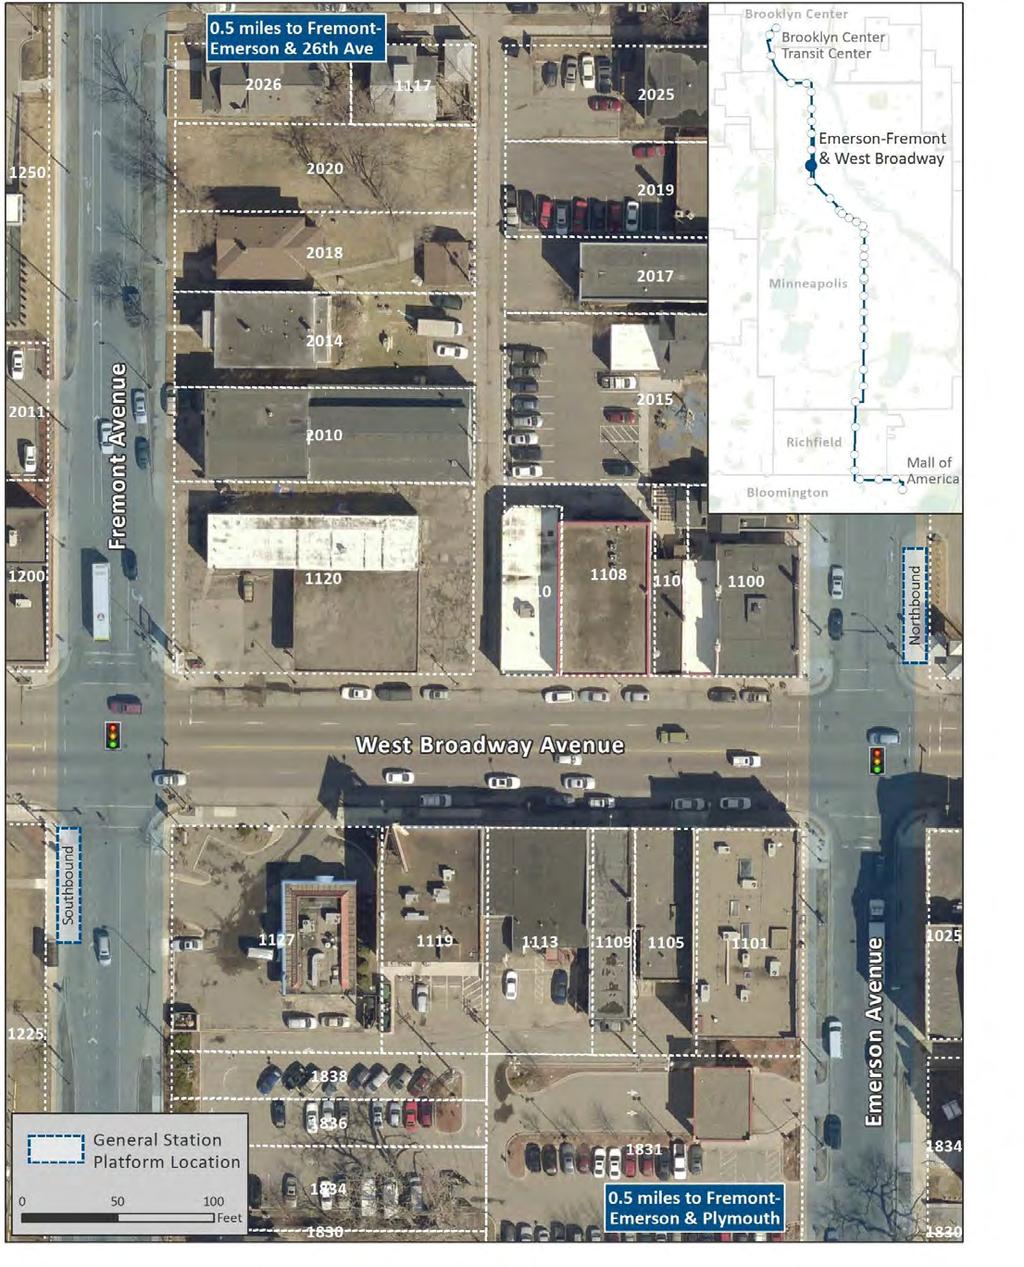 Figure 29: Recommended station location - Emerson-Fremont & West